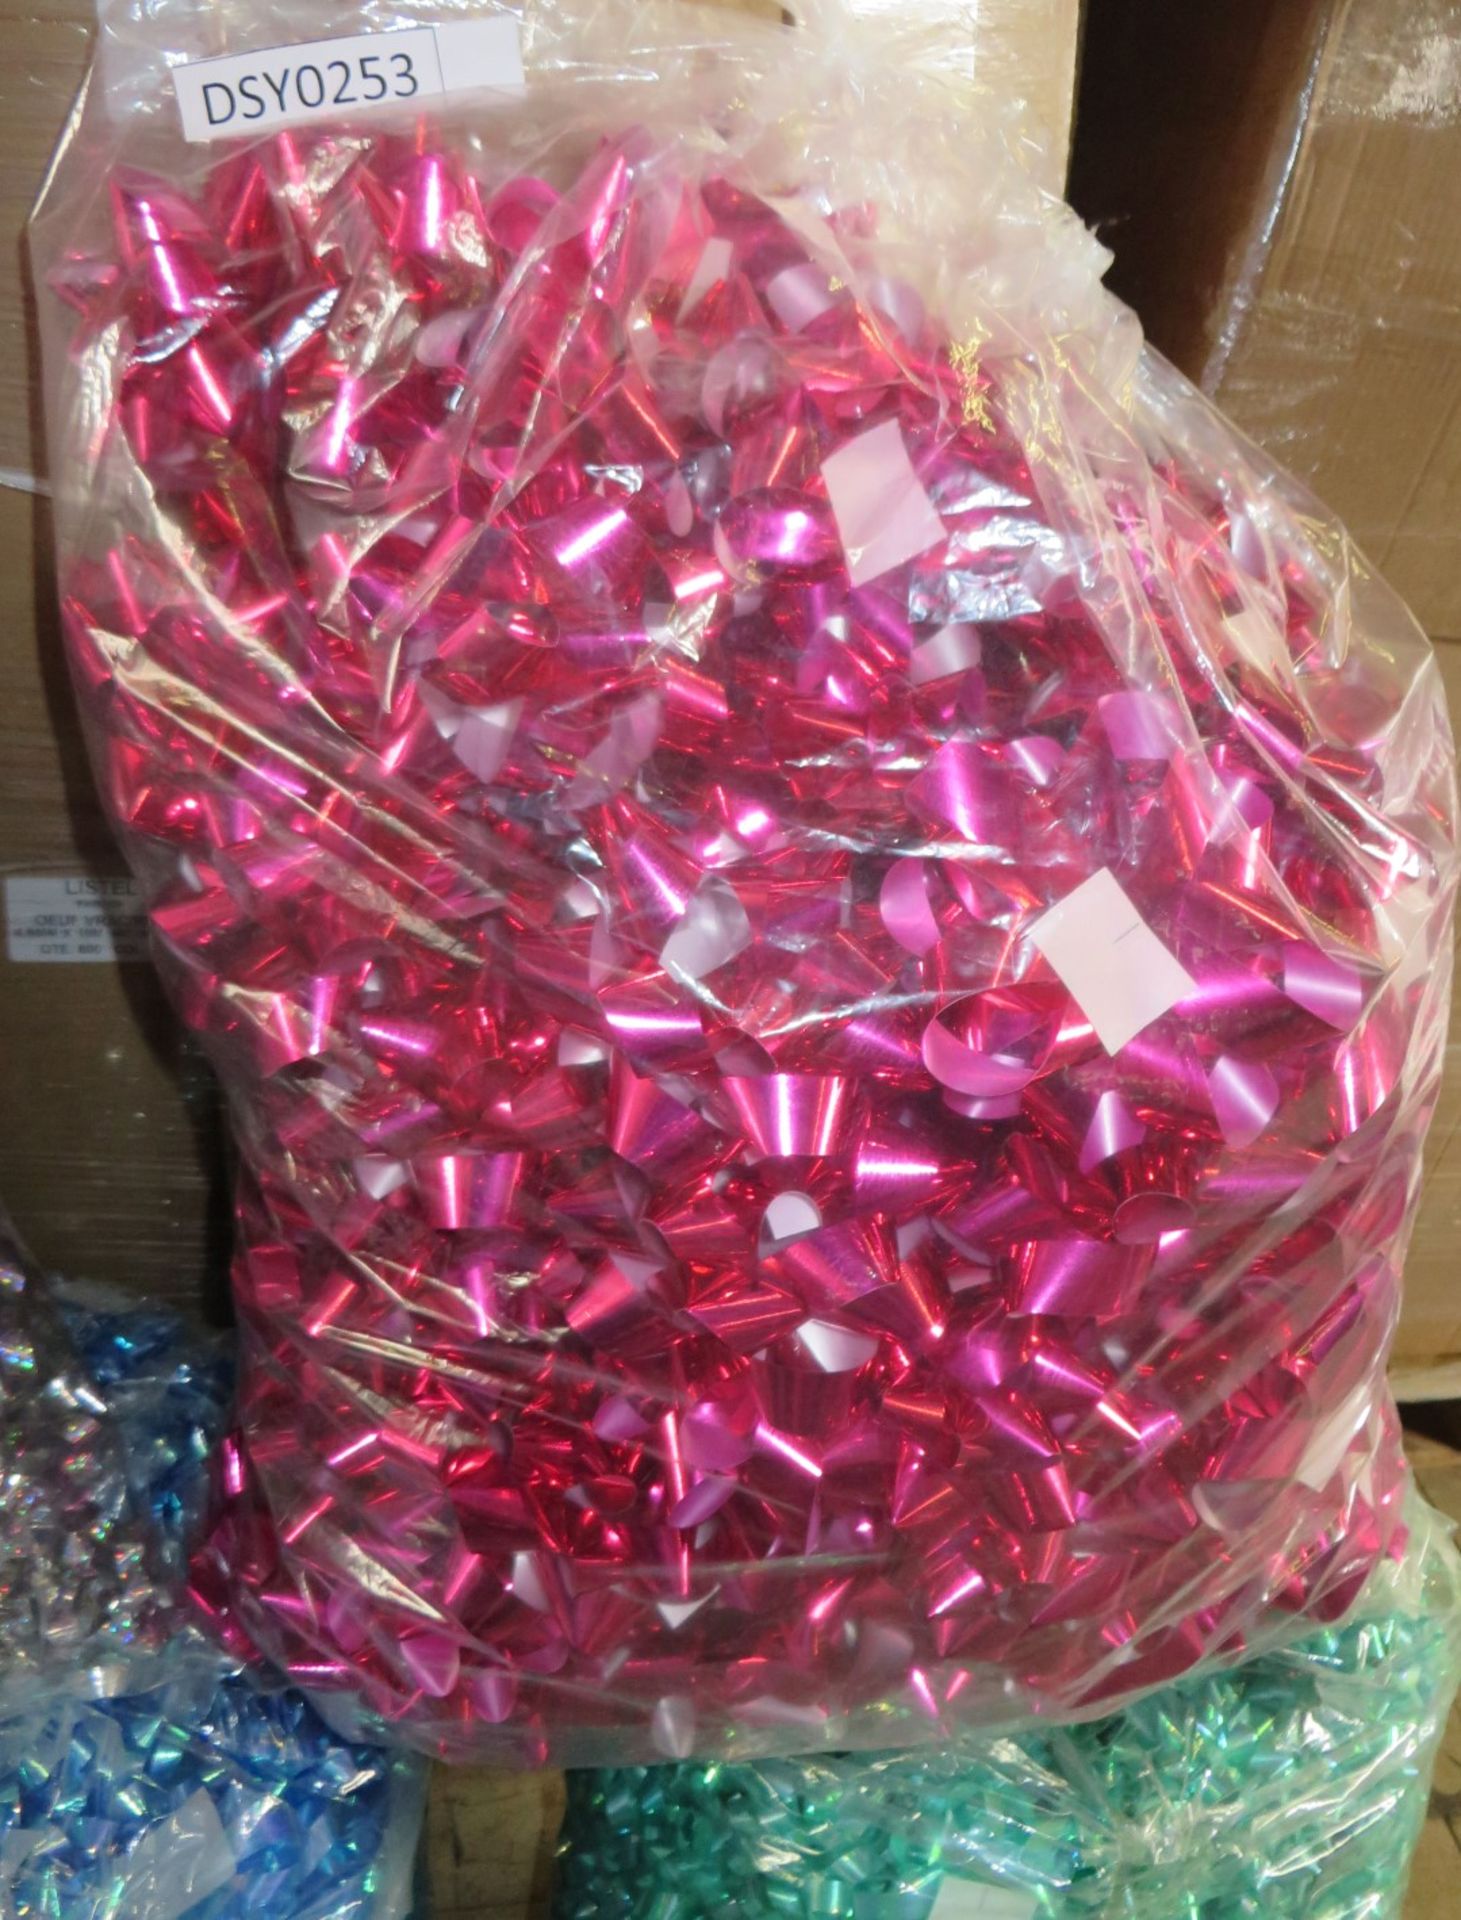 5 x Large Bags of New Self-Adhesive Present Bows - CL185 - Ref: DSY0253 - Location: Stoke-on-Trent S - Image 3 of 9